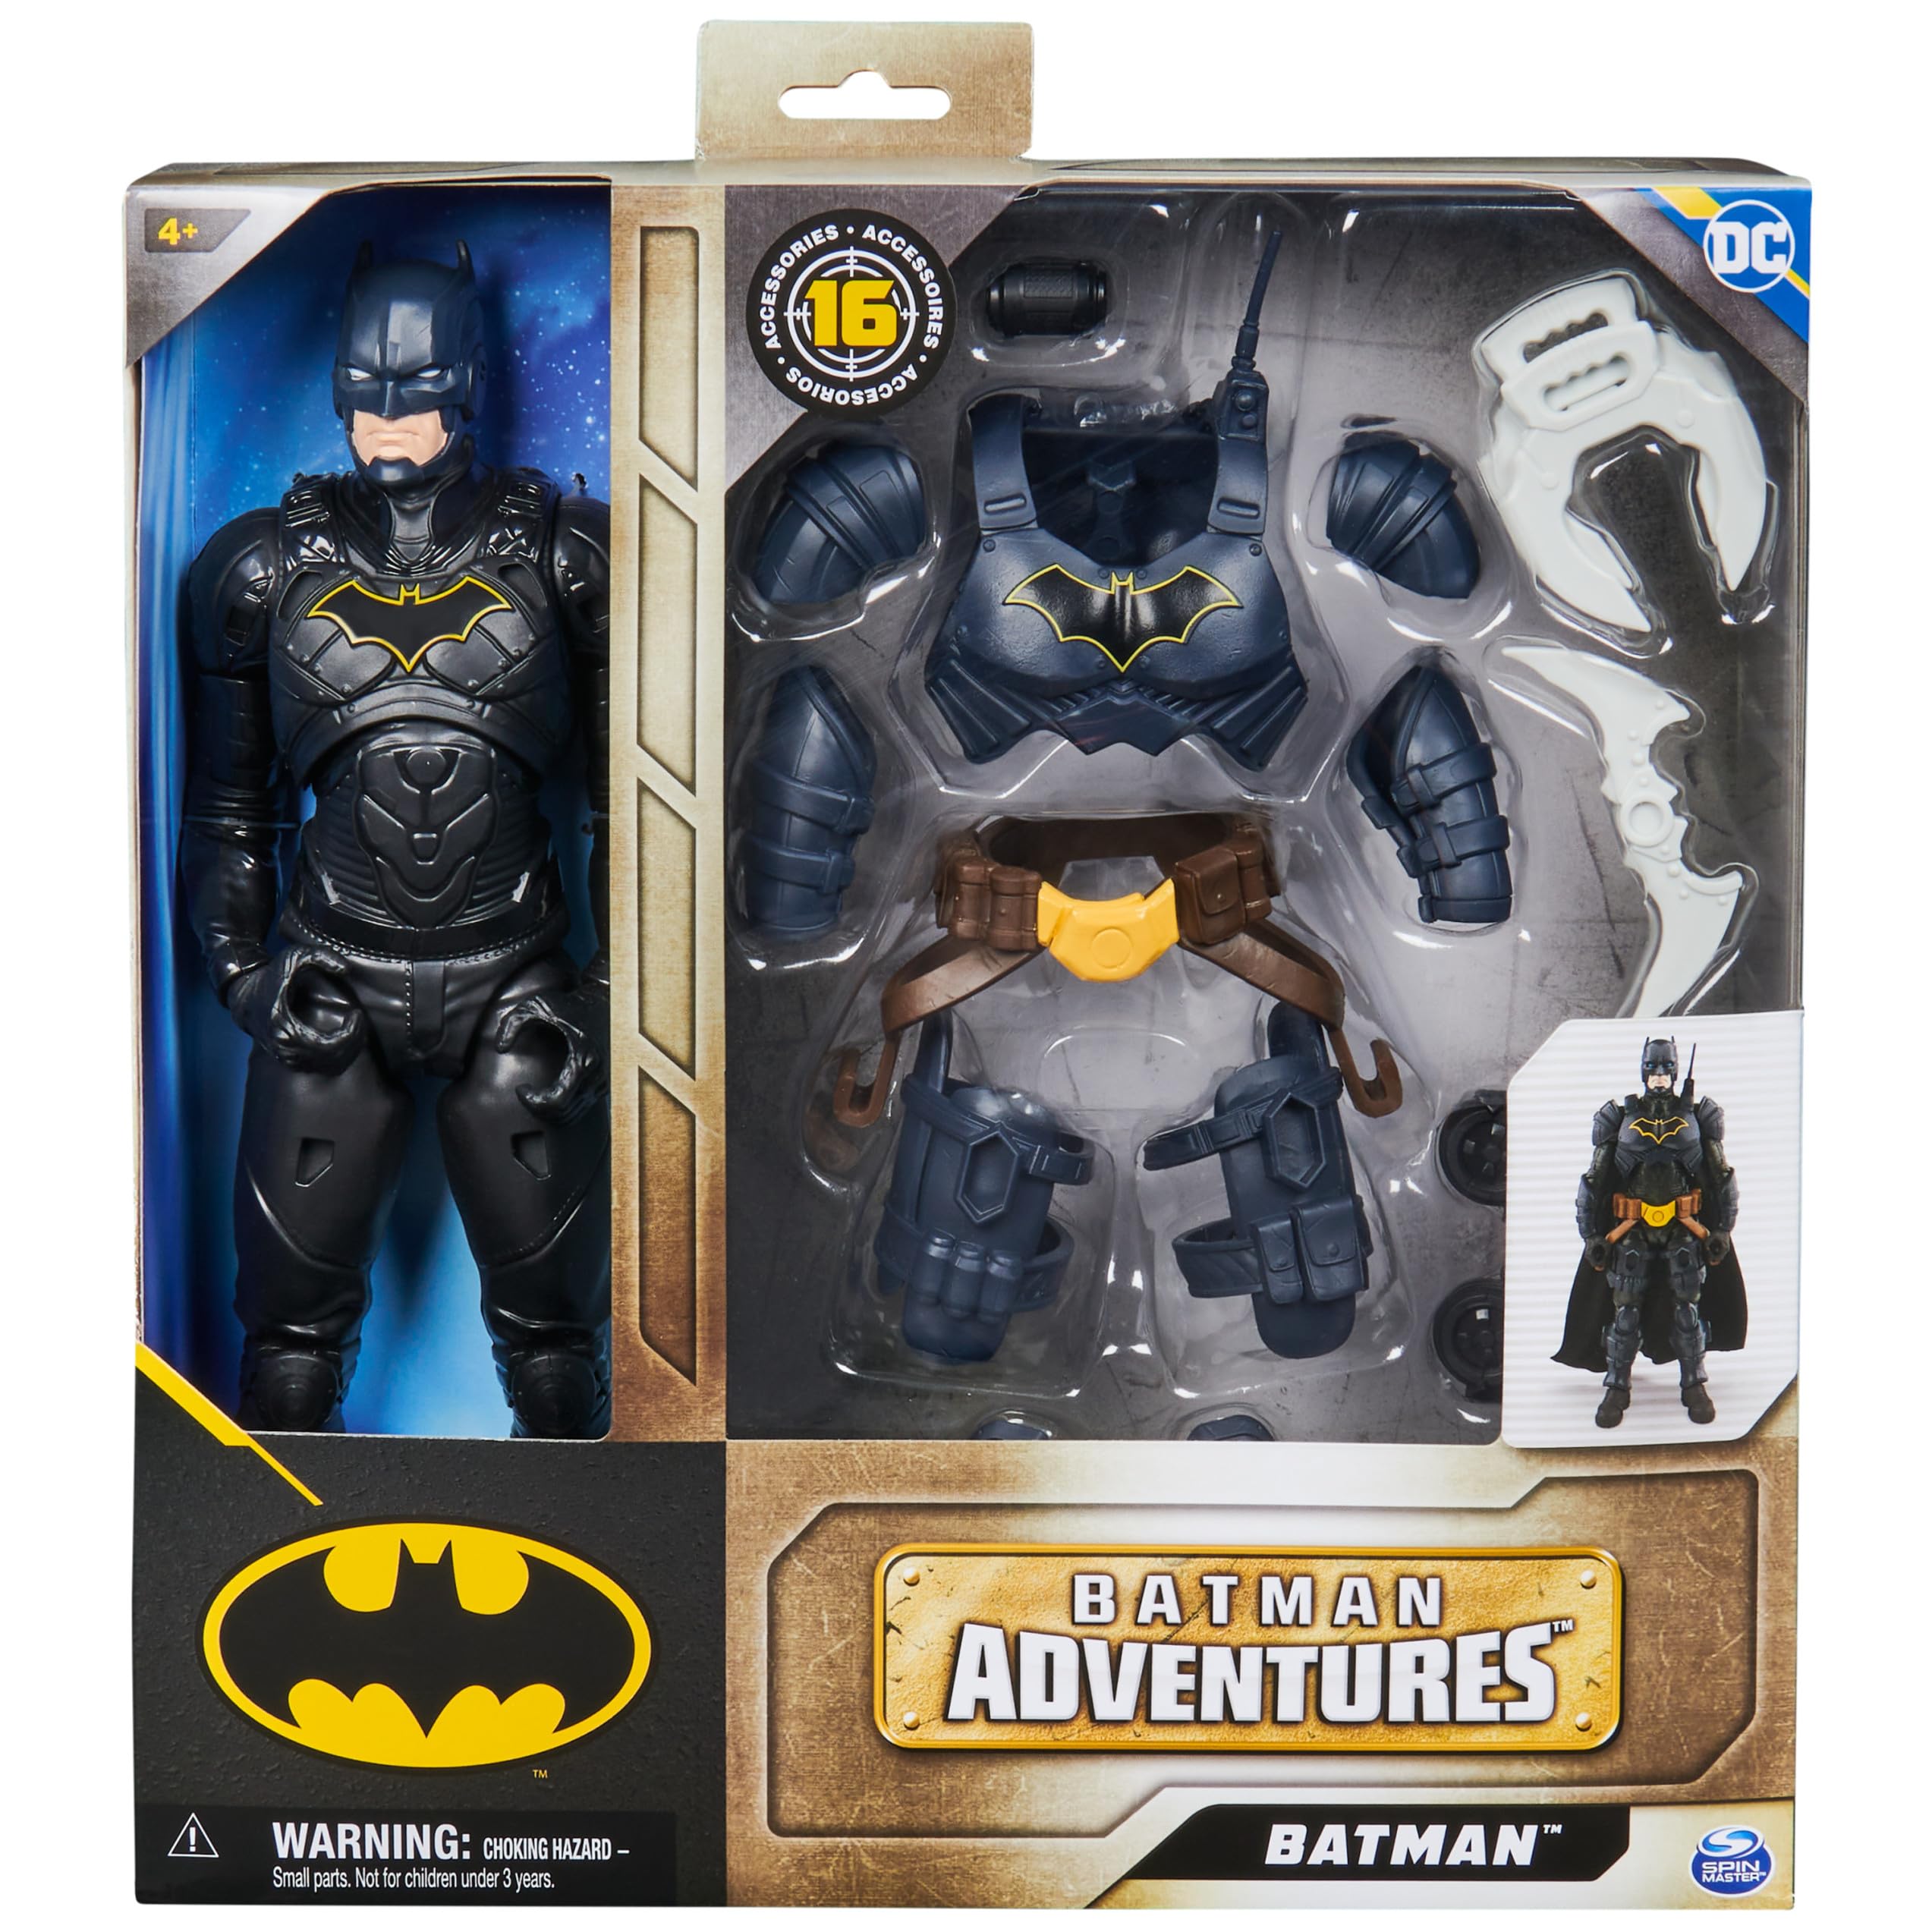 DC Comics, Batman Adventures, Batman Action Figure with 16 Armor Accessories, 17 Points of Articulation, 12-inch, Super Hero Kids Toy for Boys & Girls